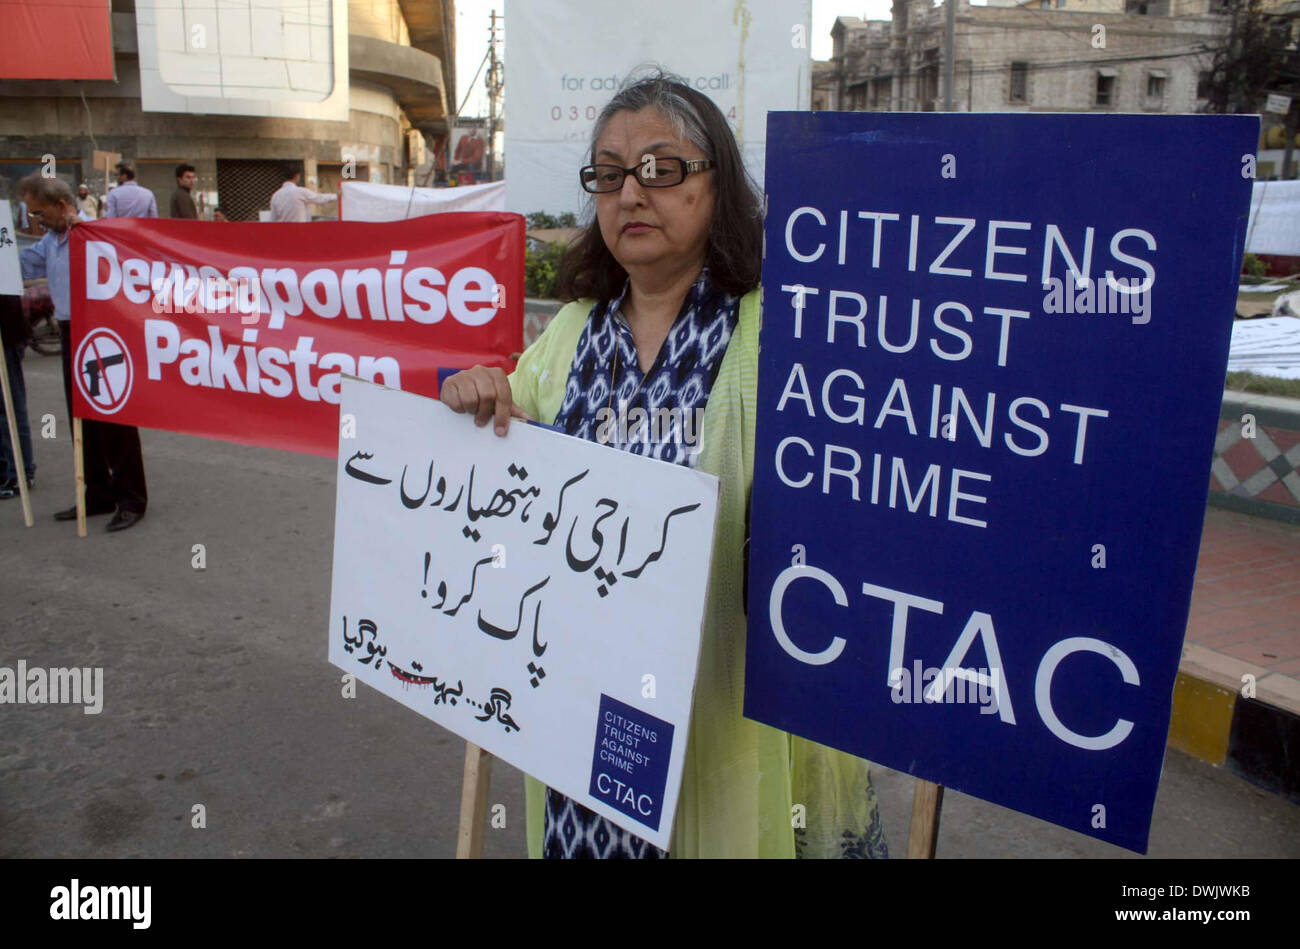 Members of NGO, Citizens Trust Against Crime (CTAC) are demonstrating in favor of peace Department while opposing terrorism, near Metro Pole Hotel in Karachi on Monday, March 10, 2014. Stock Photo